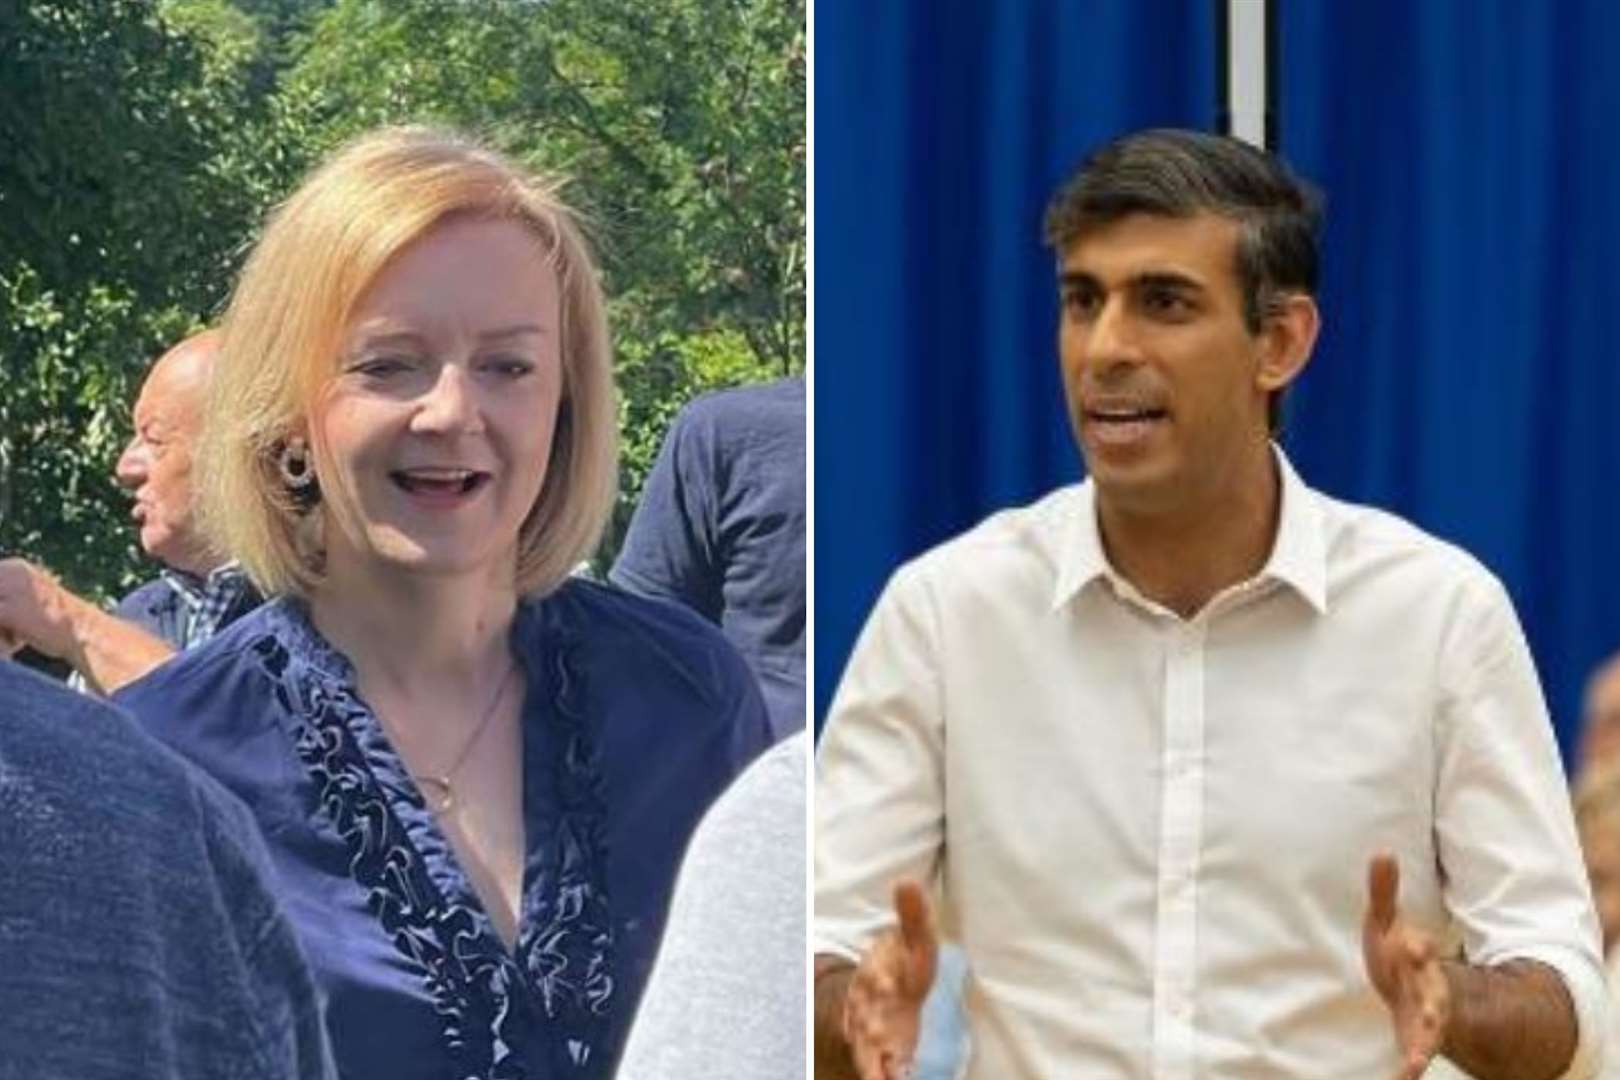 Rishi Sunak and Liz Truss are going head-to-head for the Tory leadership